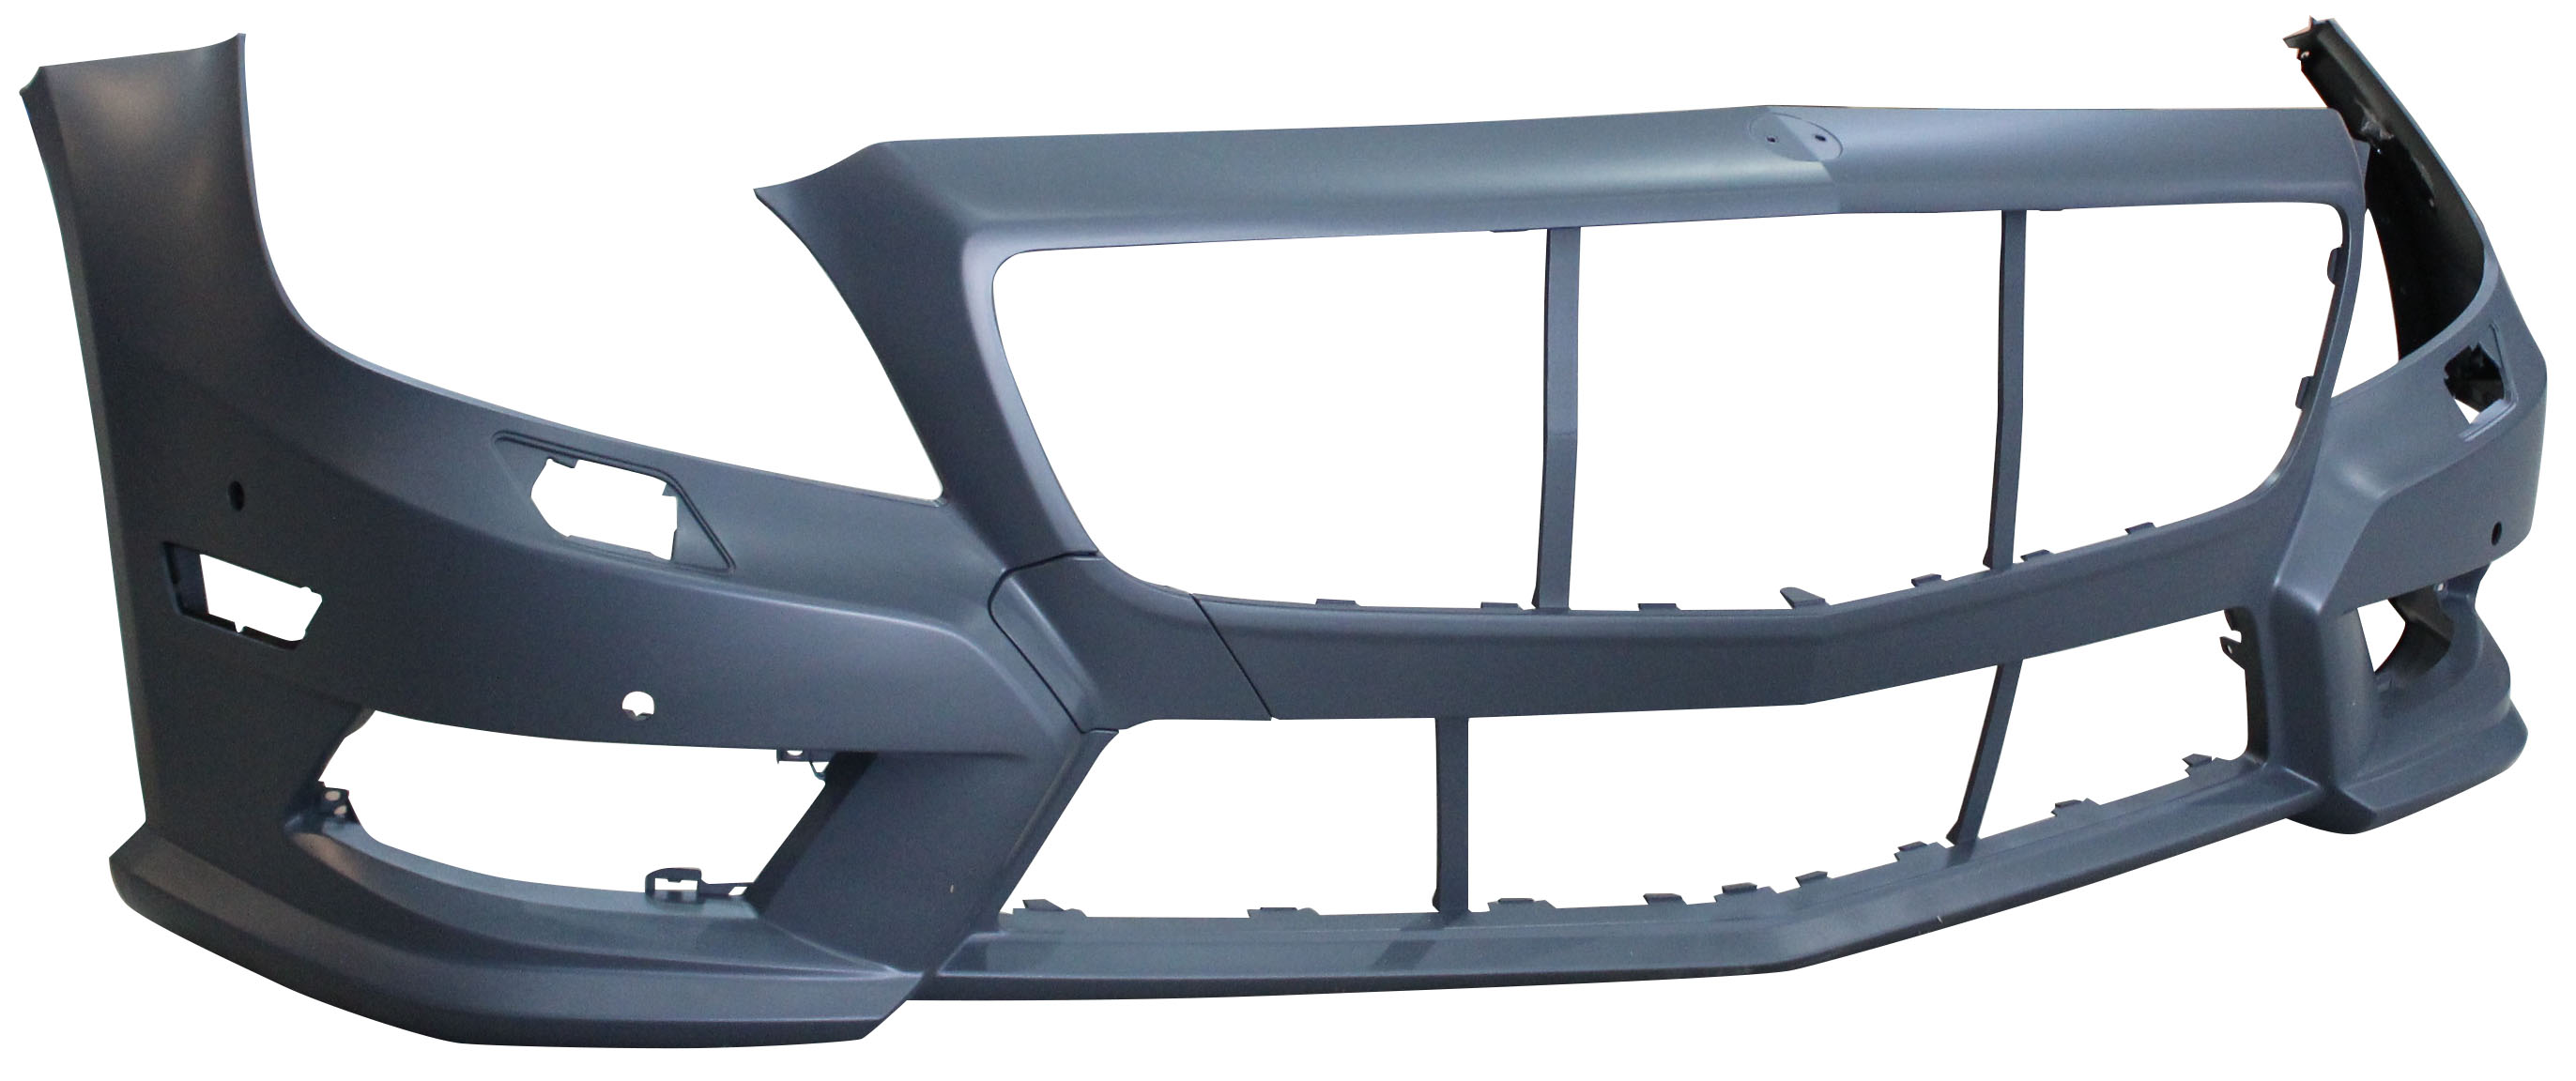 Aftermarket BUMPER COVERS for MERCEDES-BENZ - CLS550, CLS550,12-14,Front bumper cover